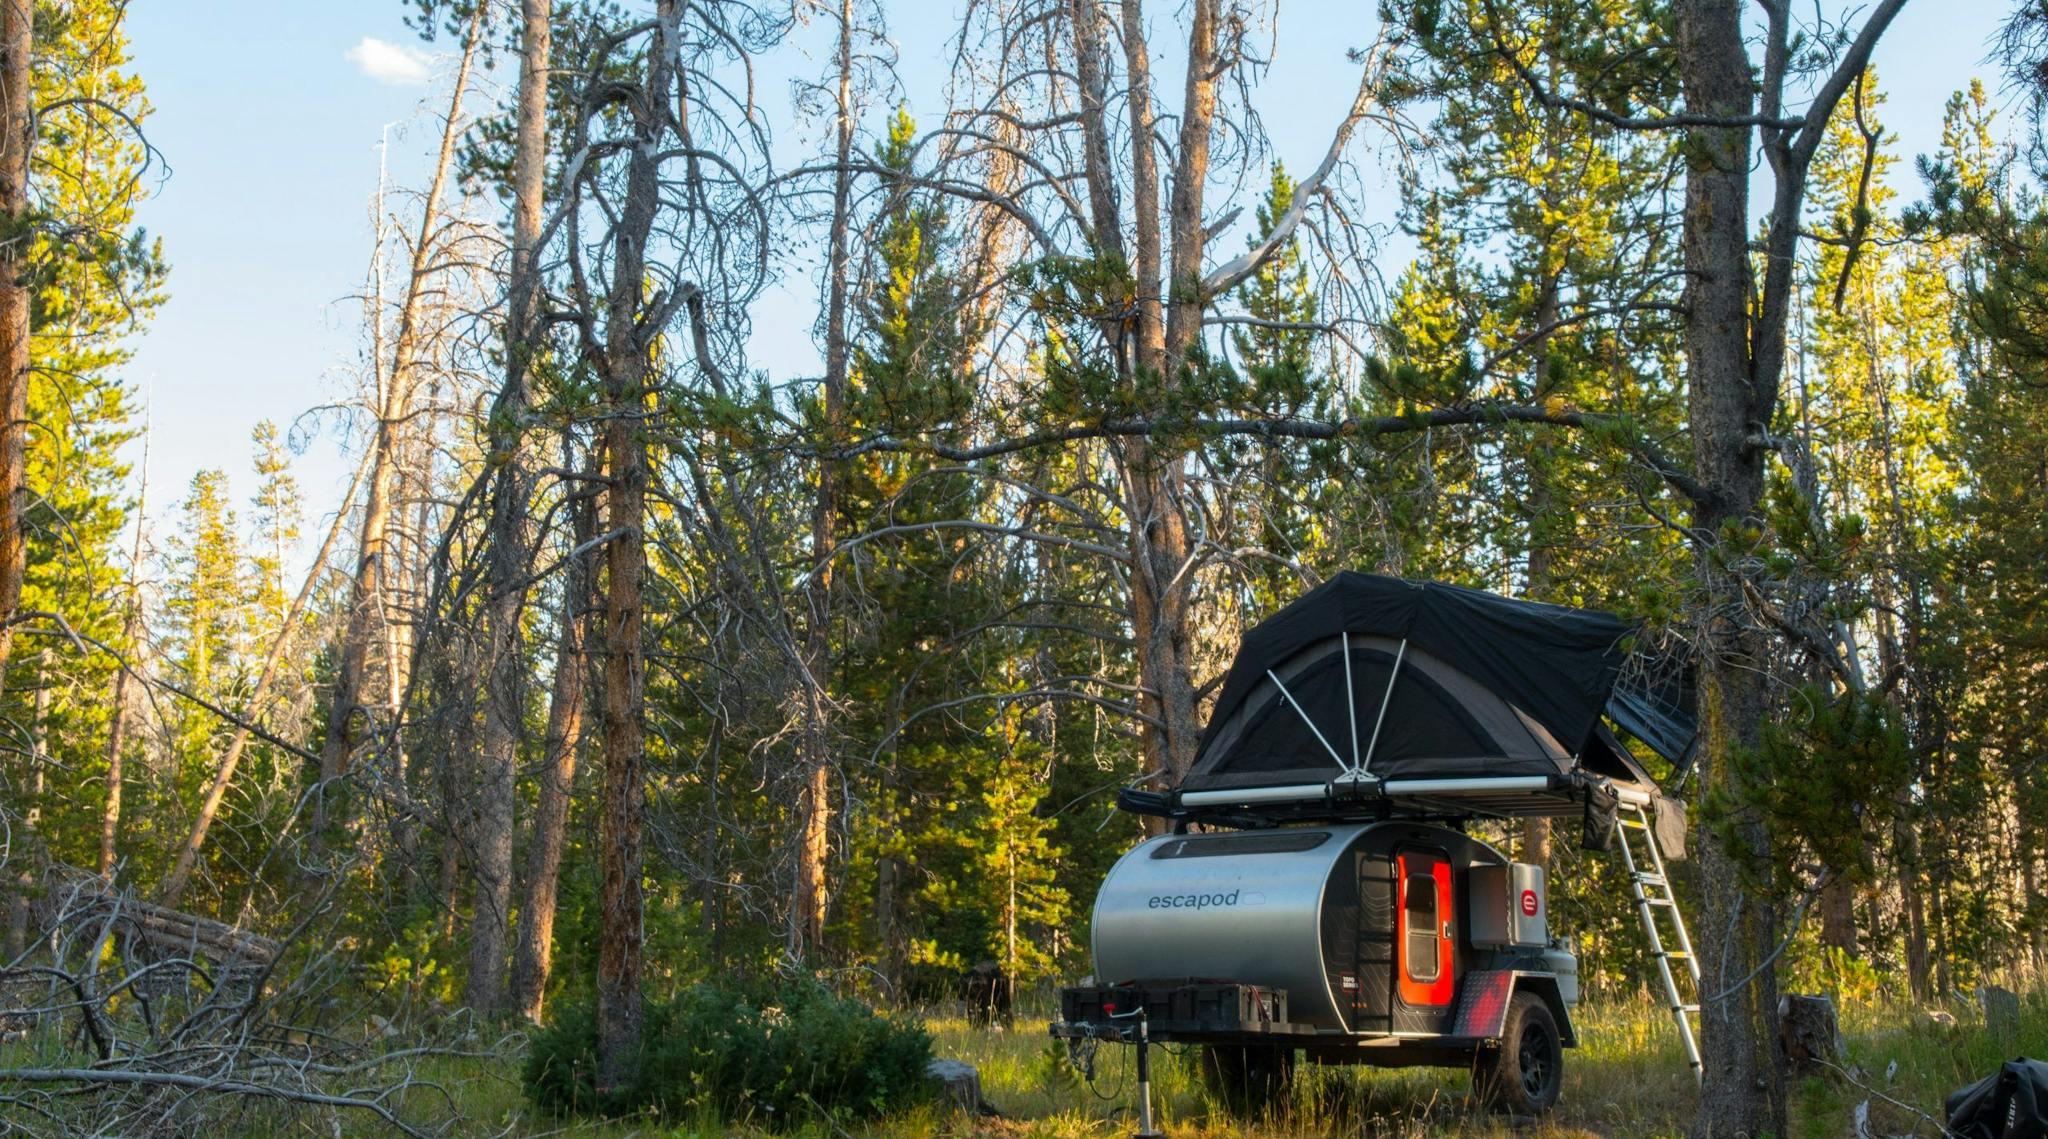 A black teardrop camper with a red door parked in a dispersed camping site with a rooftop tent mounted on top.